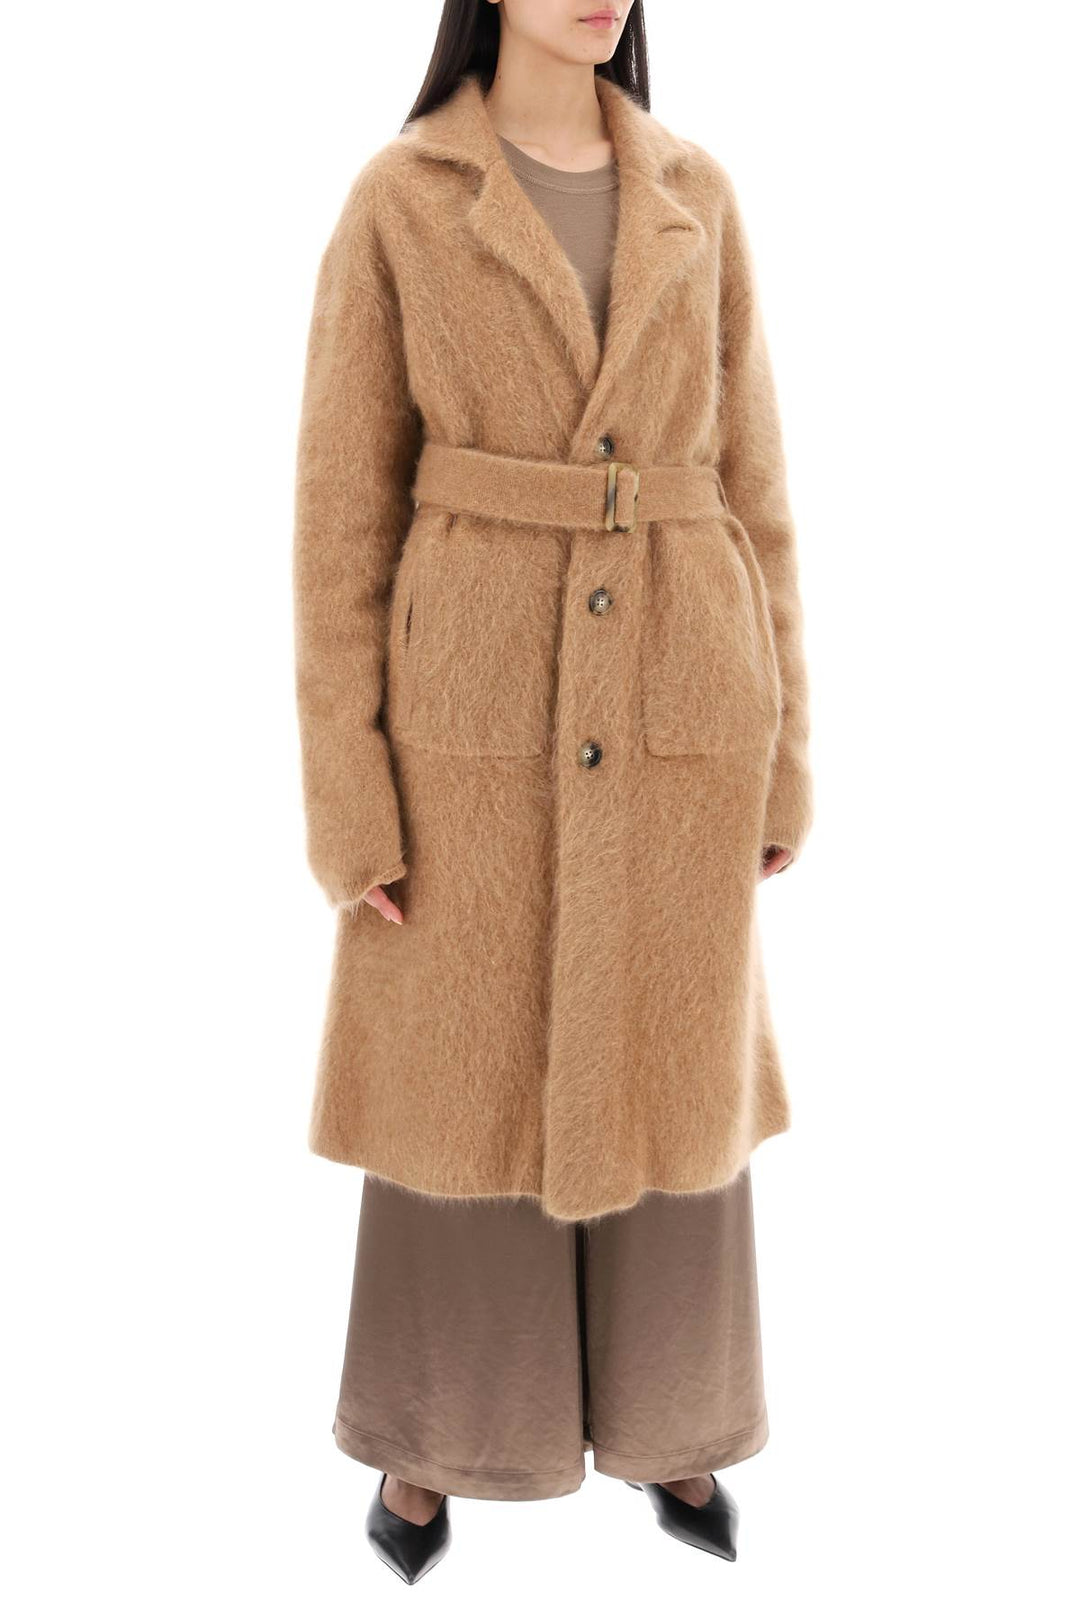 Guest In Residence Brushed Cashmere Coat   Brown